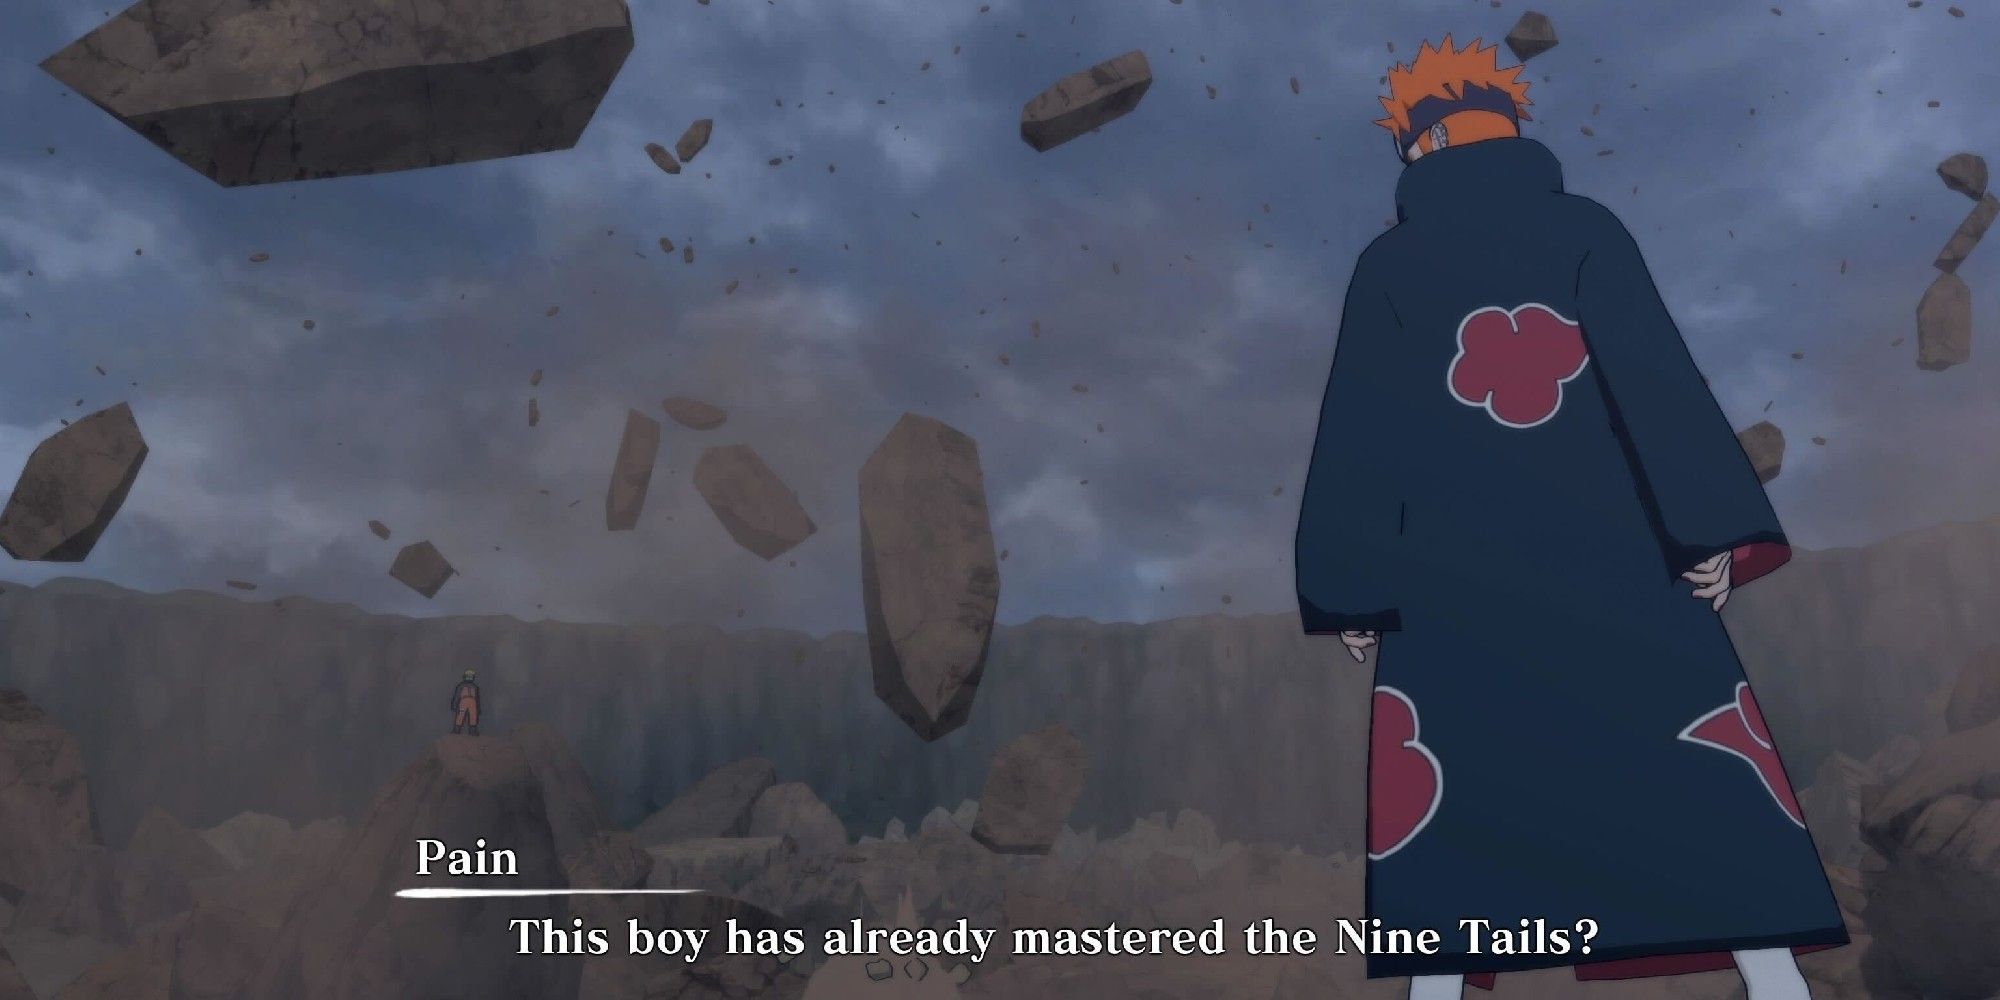 Pain during the showdown with Naruto